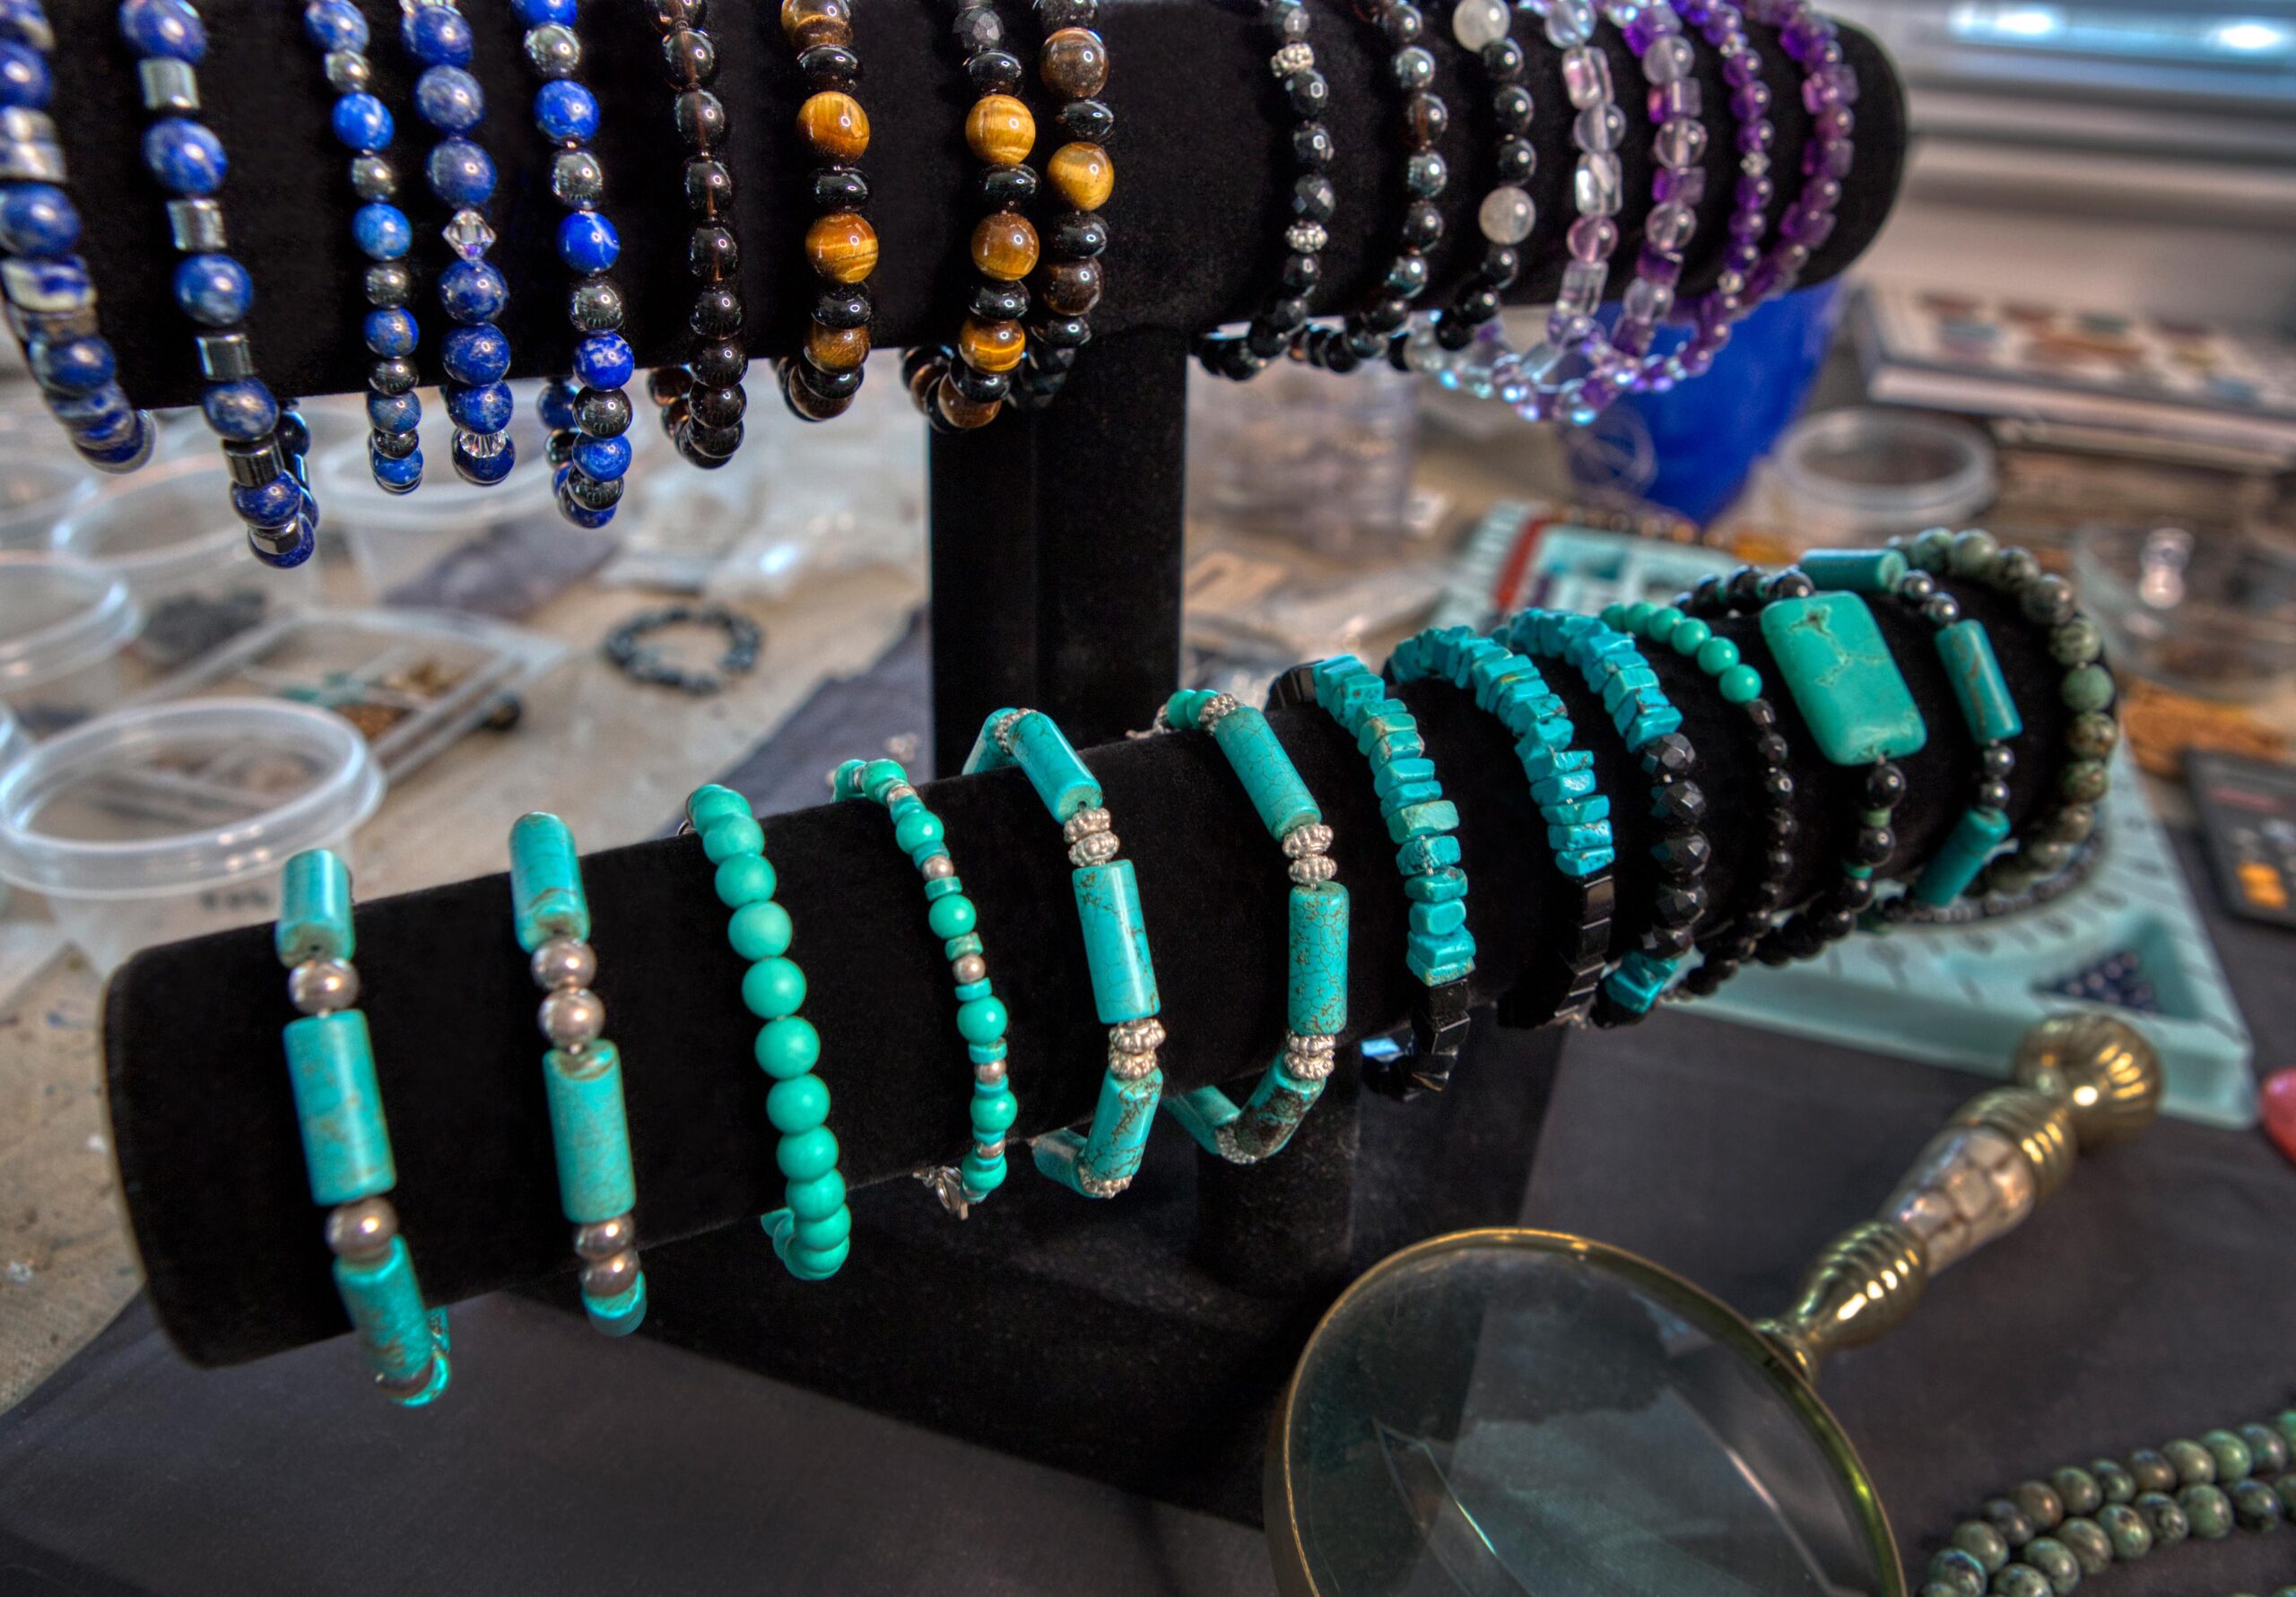 A variety of turquoise and other gemstone handmade bracelets on black display in an artist's studio